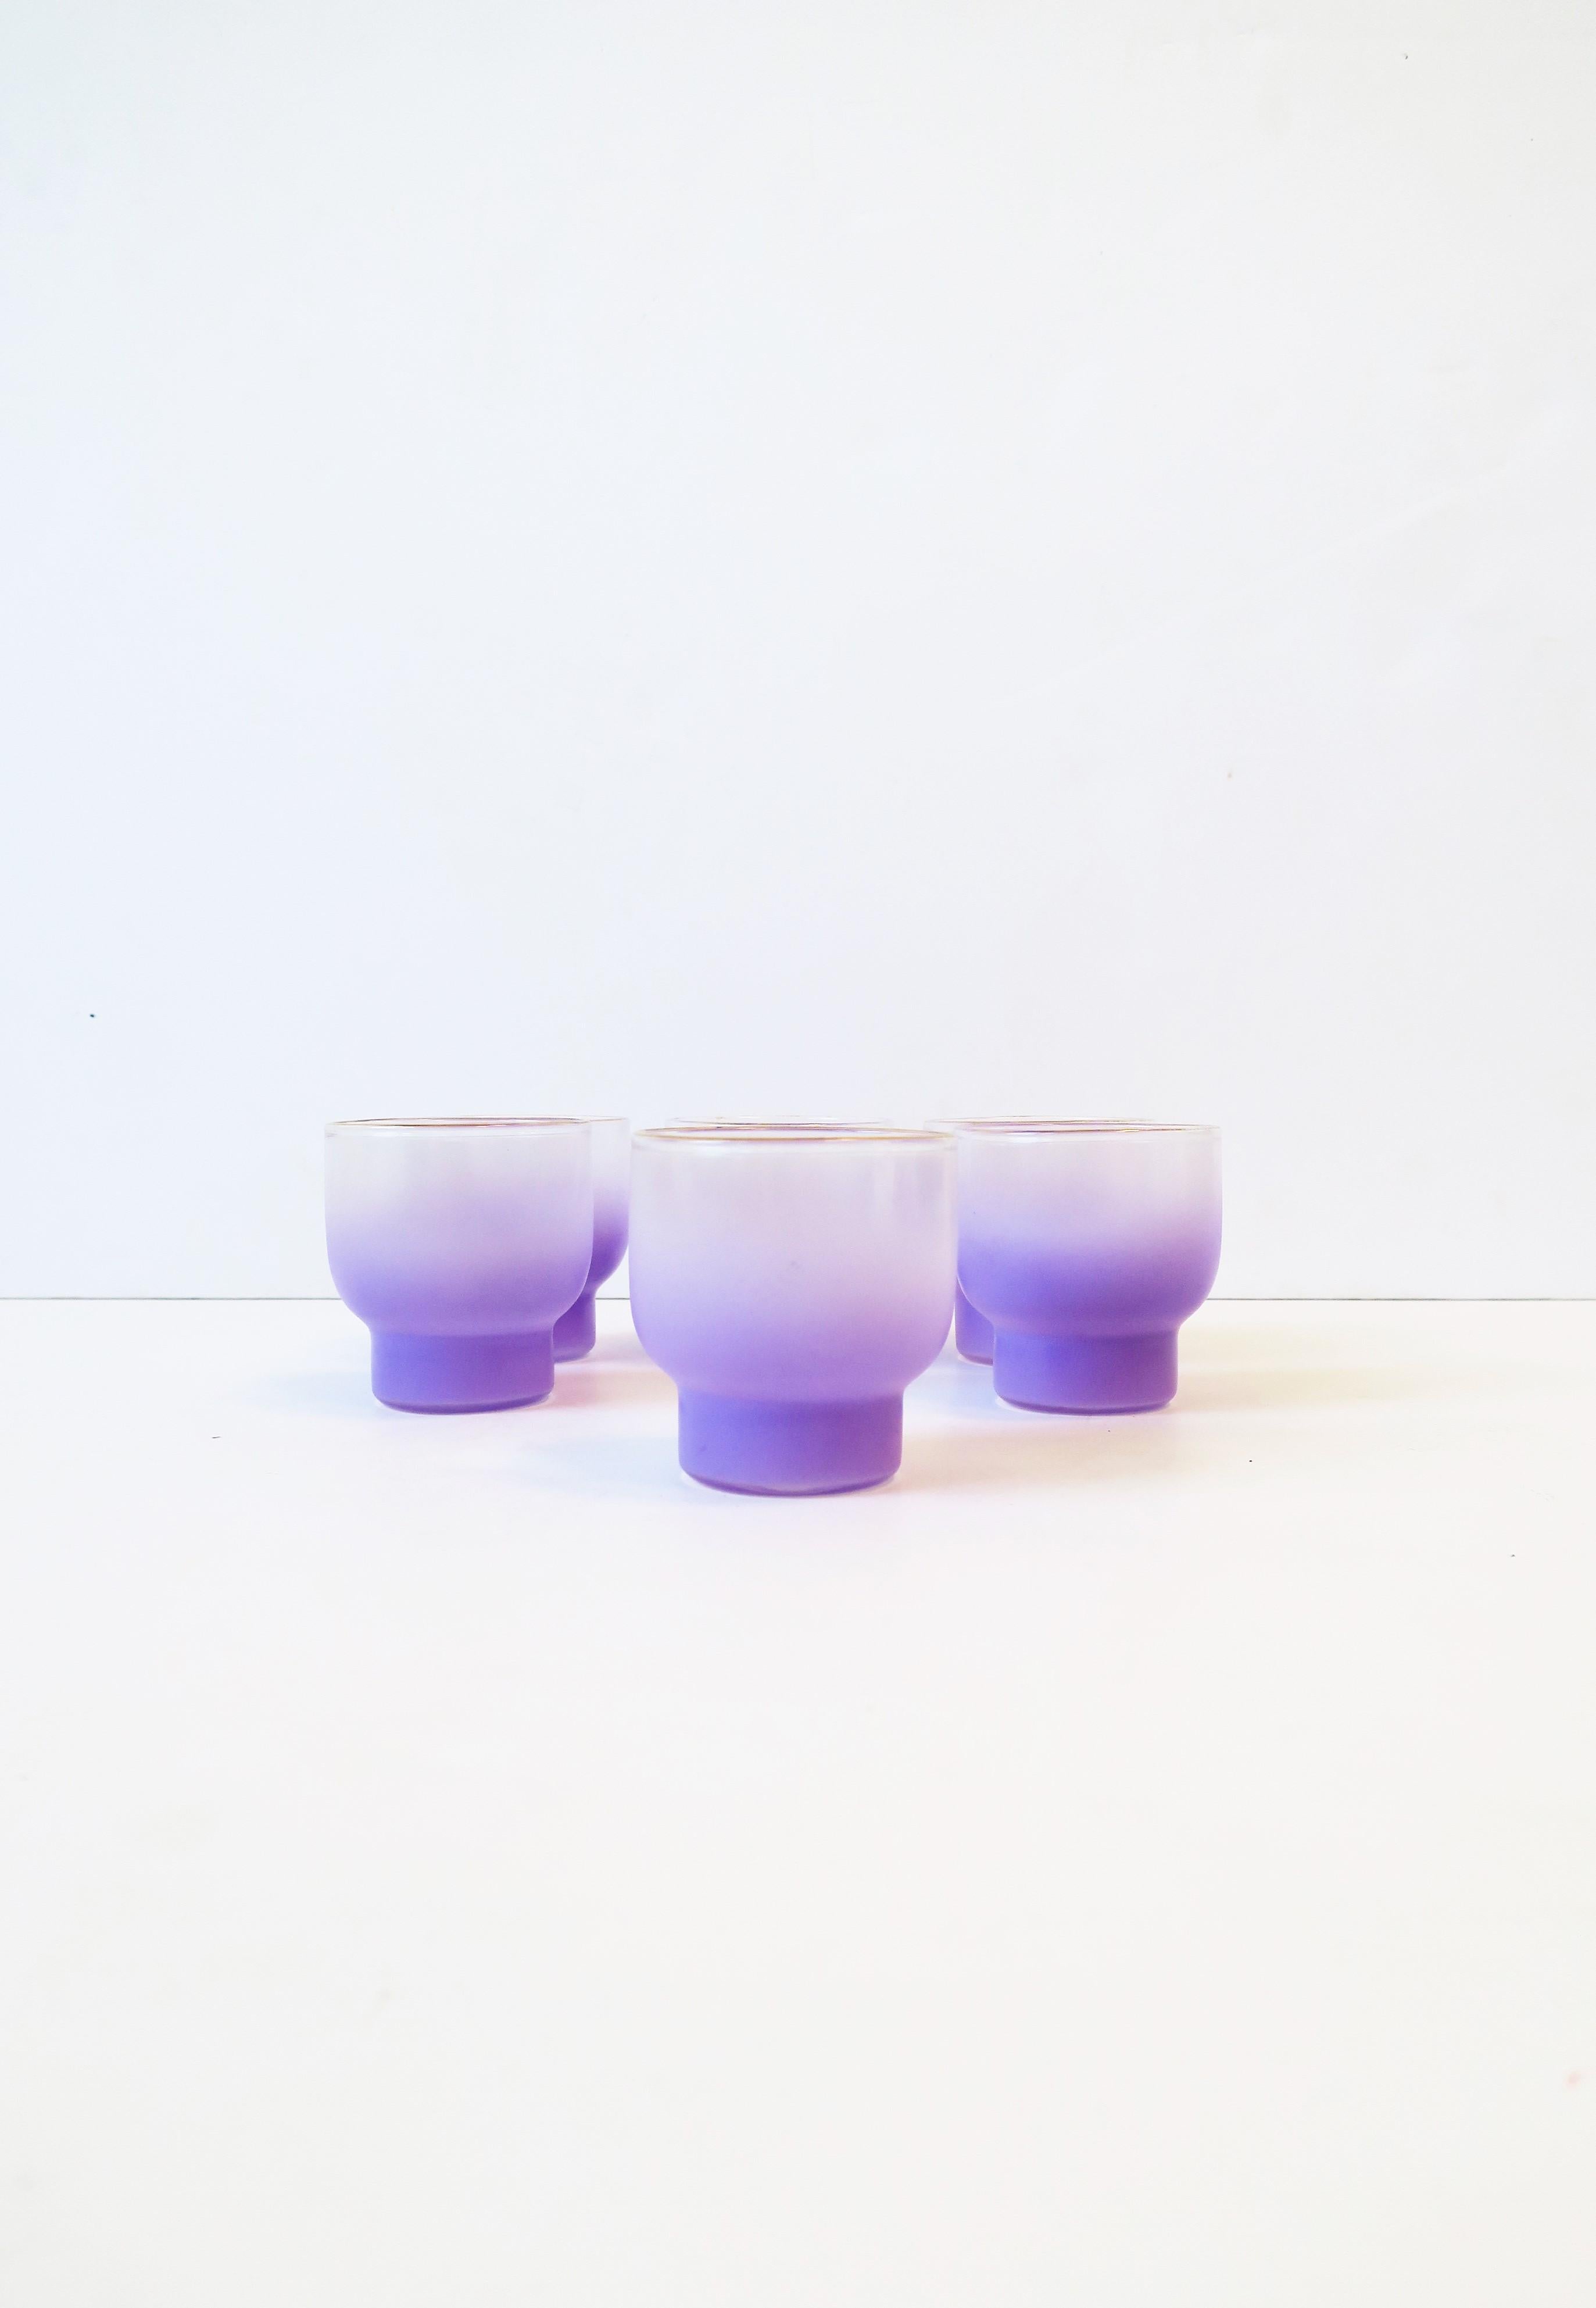 A set of six (6) vintage pastel purple lavender cocktail rocks' glasses, circa mid-20th century, 1960s, USA. Glass has a recessed base and a touch of gold detail around rim. A great set for any bar, bar cart, summer and holiday entertaining, etc.